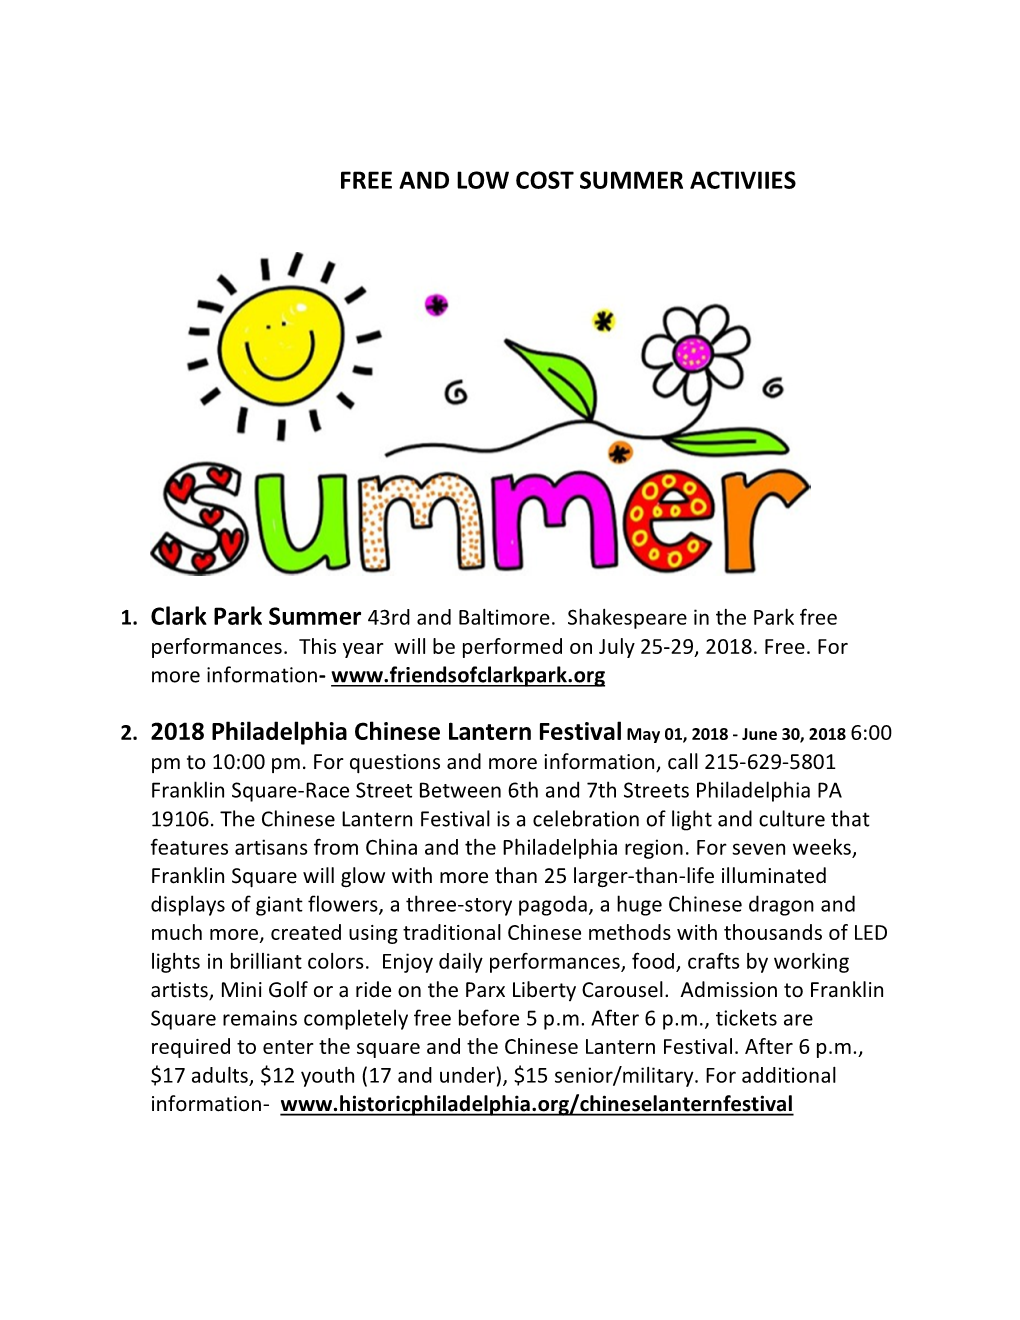 Free and Low Cost Summer Activiies 2. 2018